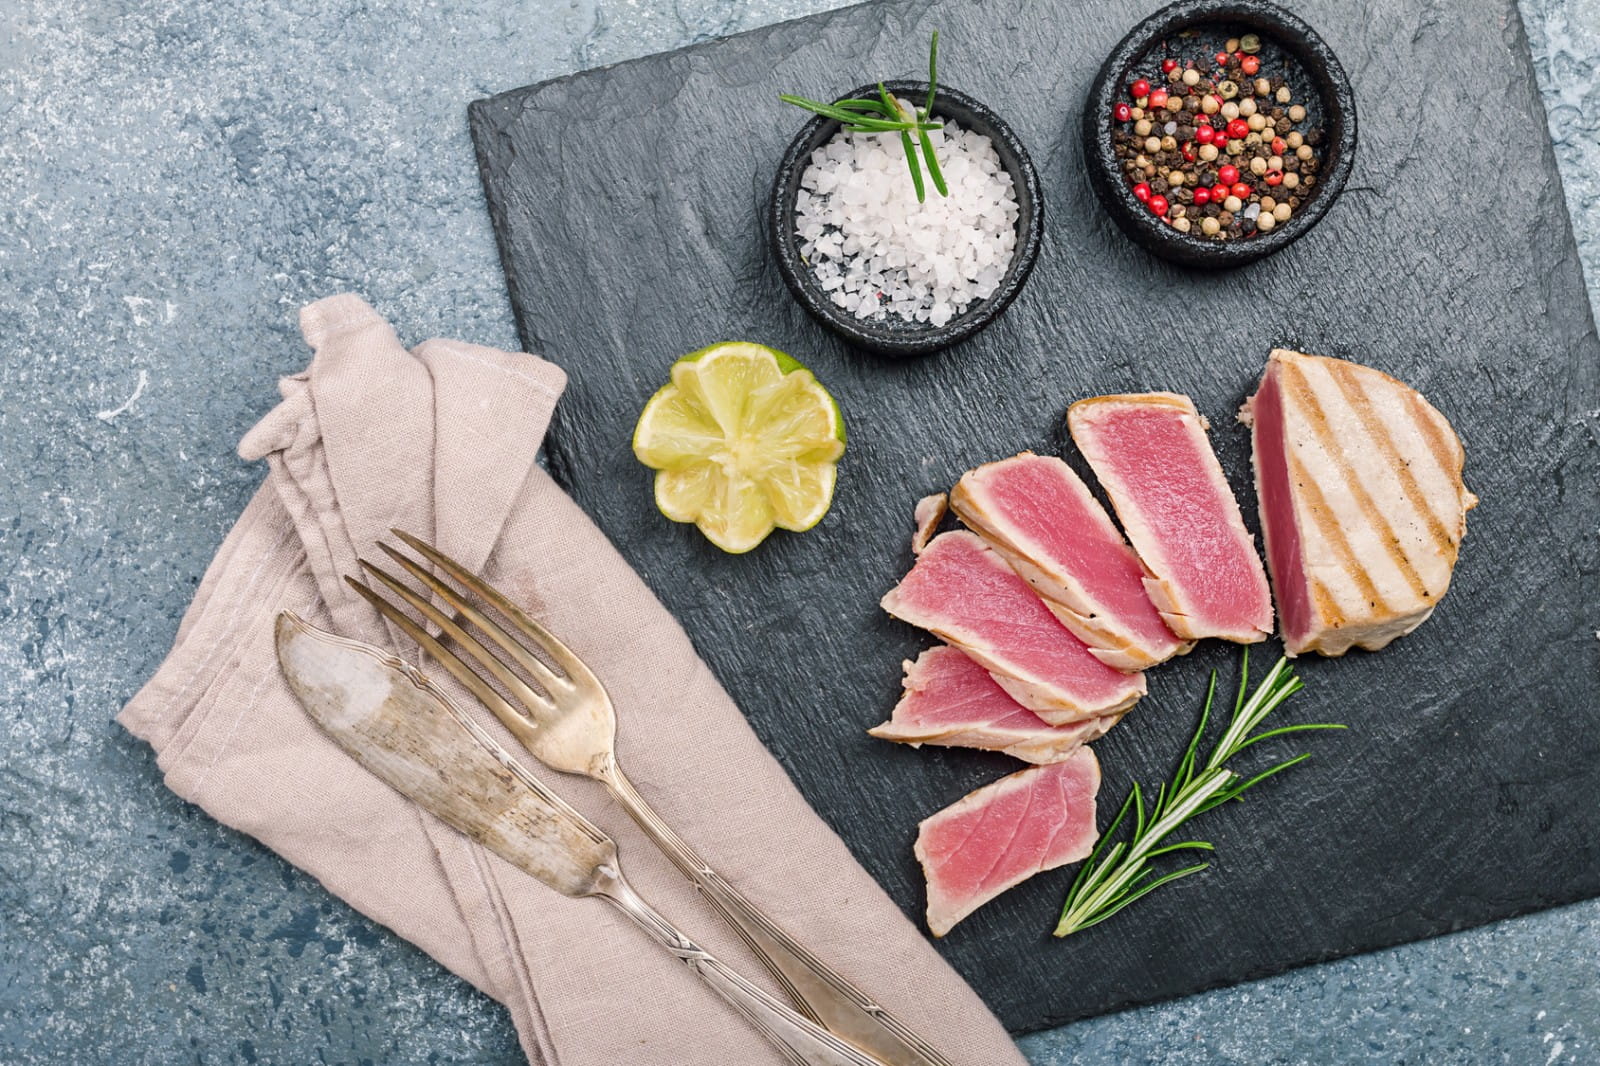 What's the best wine match for tuna?